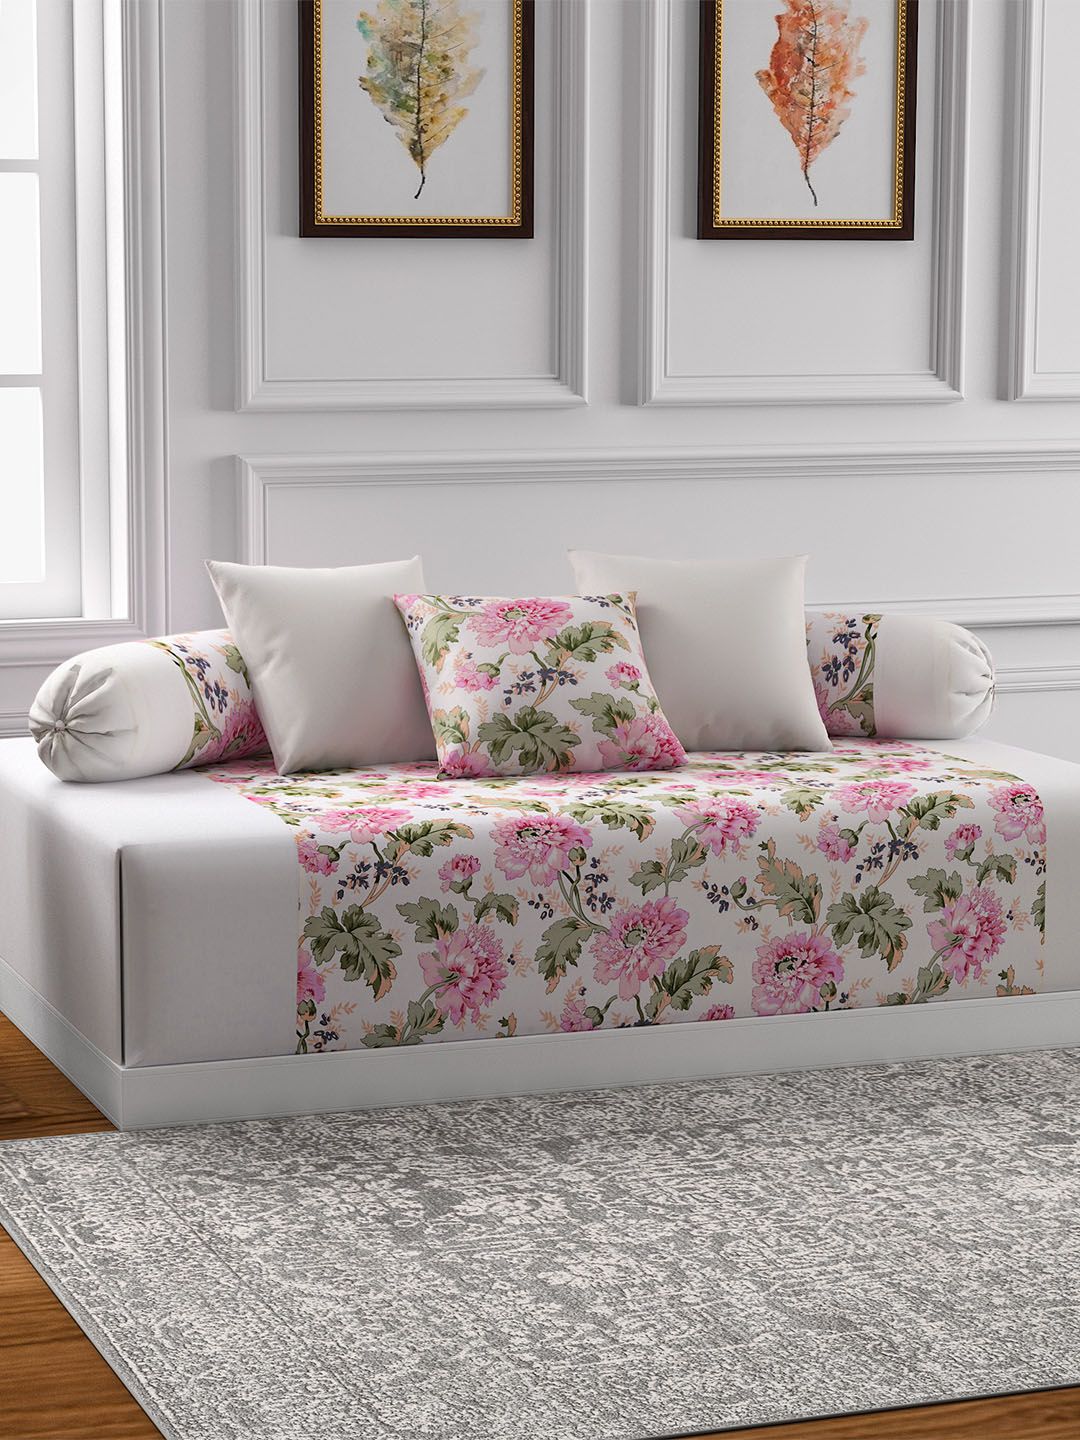 Swayam Cream & Pink Floral Print Diwan Set with Bolster and Cushion Covers Price in India